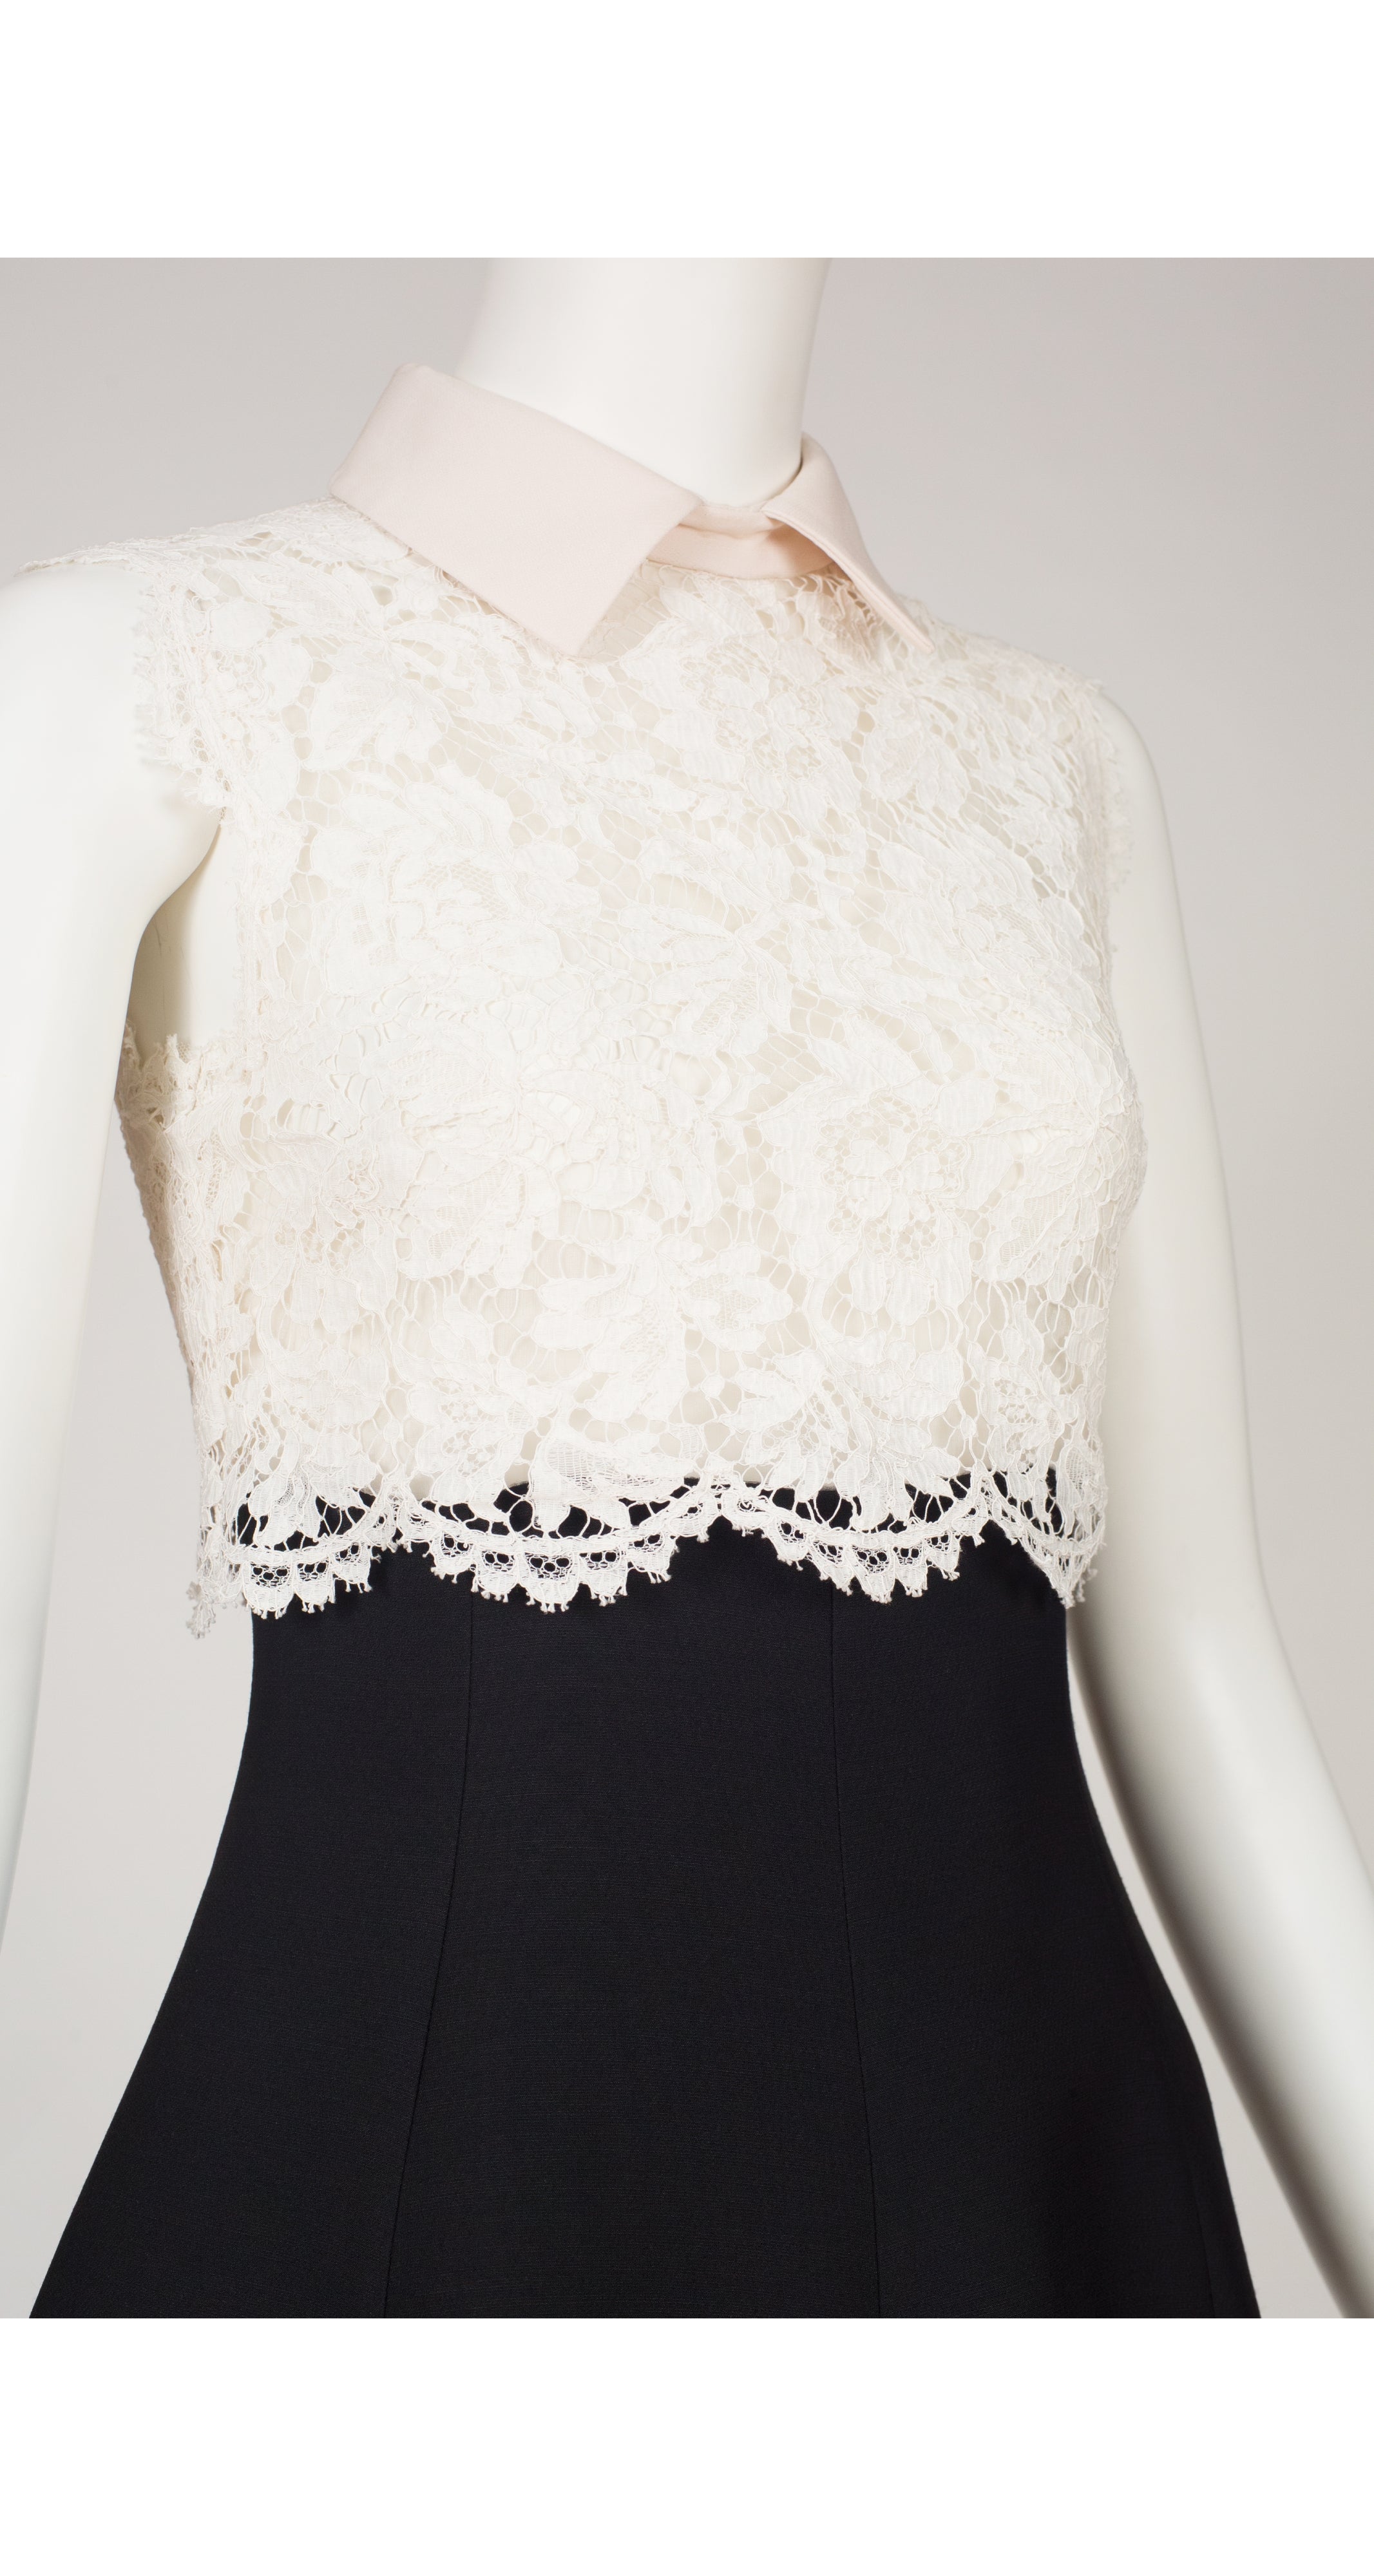 2016 Scalloped Floral Lace Collared A-Line Dress